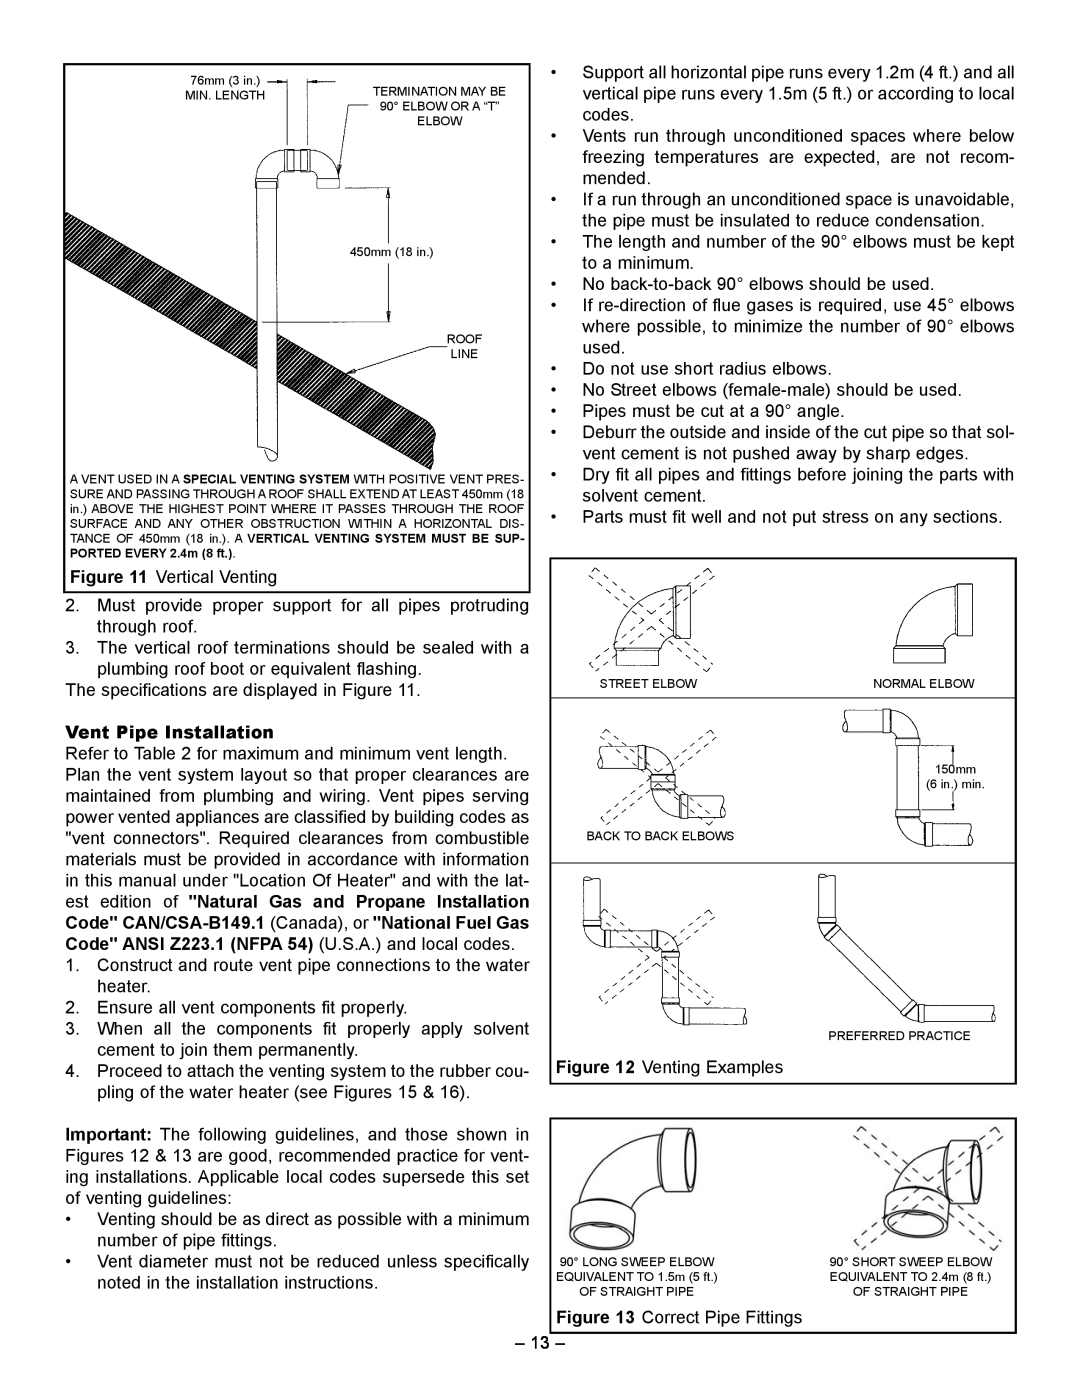 GSW 5065 manual Vent Pipe Installation, Code CAN/CSA-B149.1 Canada, or National Fuel Gas 